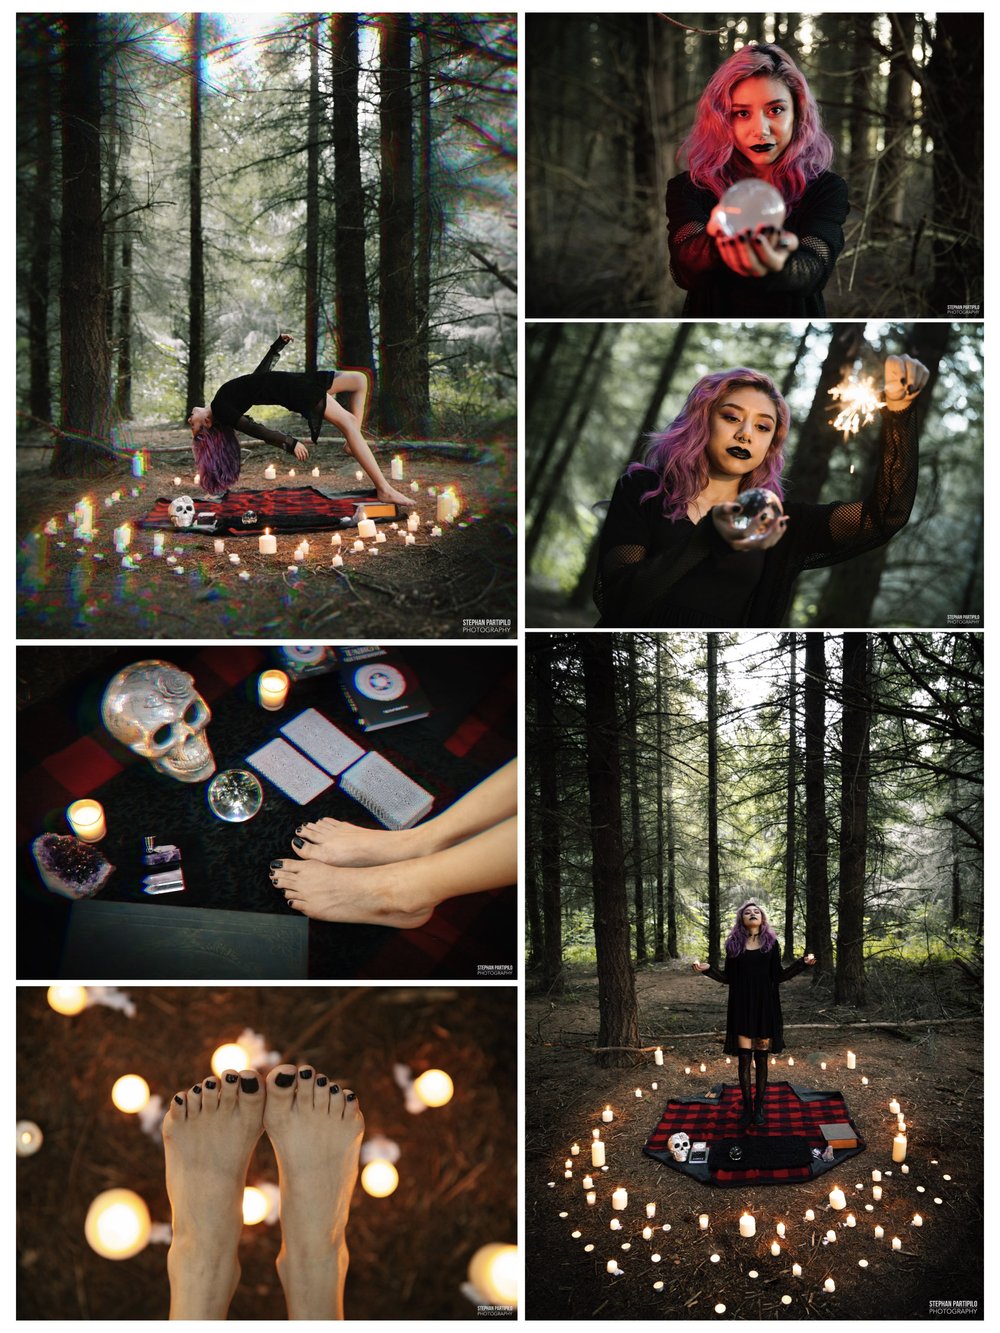 Young Brunette 19 Year Old Model Witch Vibes Fall Halloween October In The Woods Forest COLLAGE.jpeg